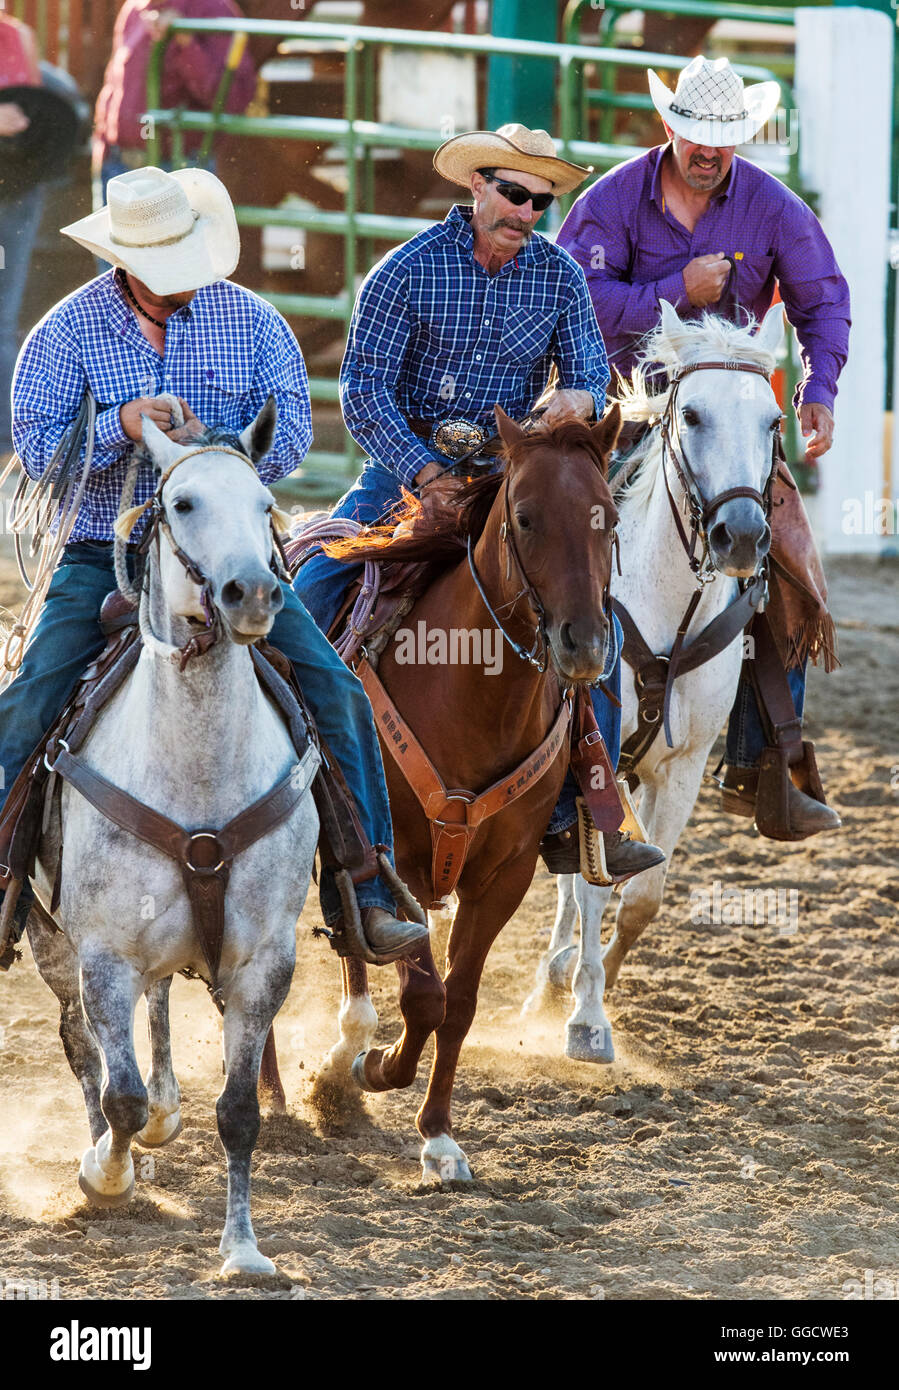 Rodeo Cowboys à cheval, Chaffee County Fair & Rodeo, Salida, Colorado, USA Banque D'Images